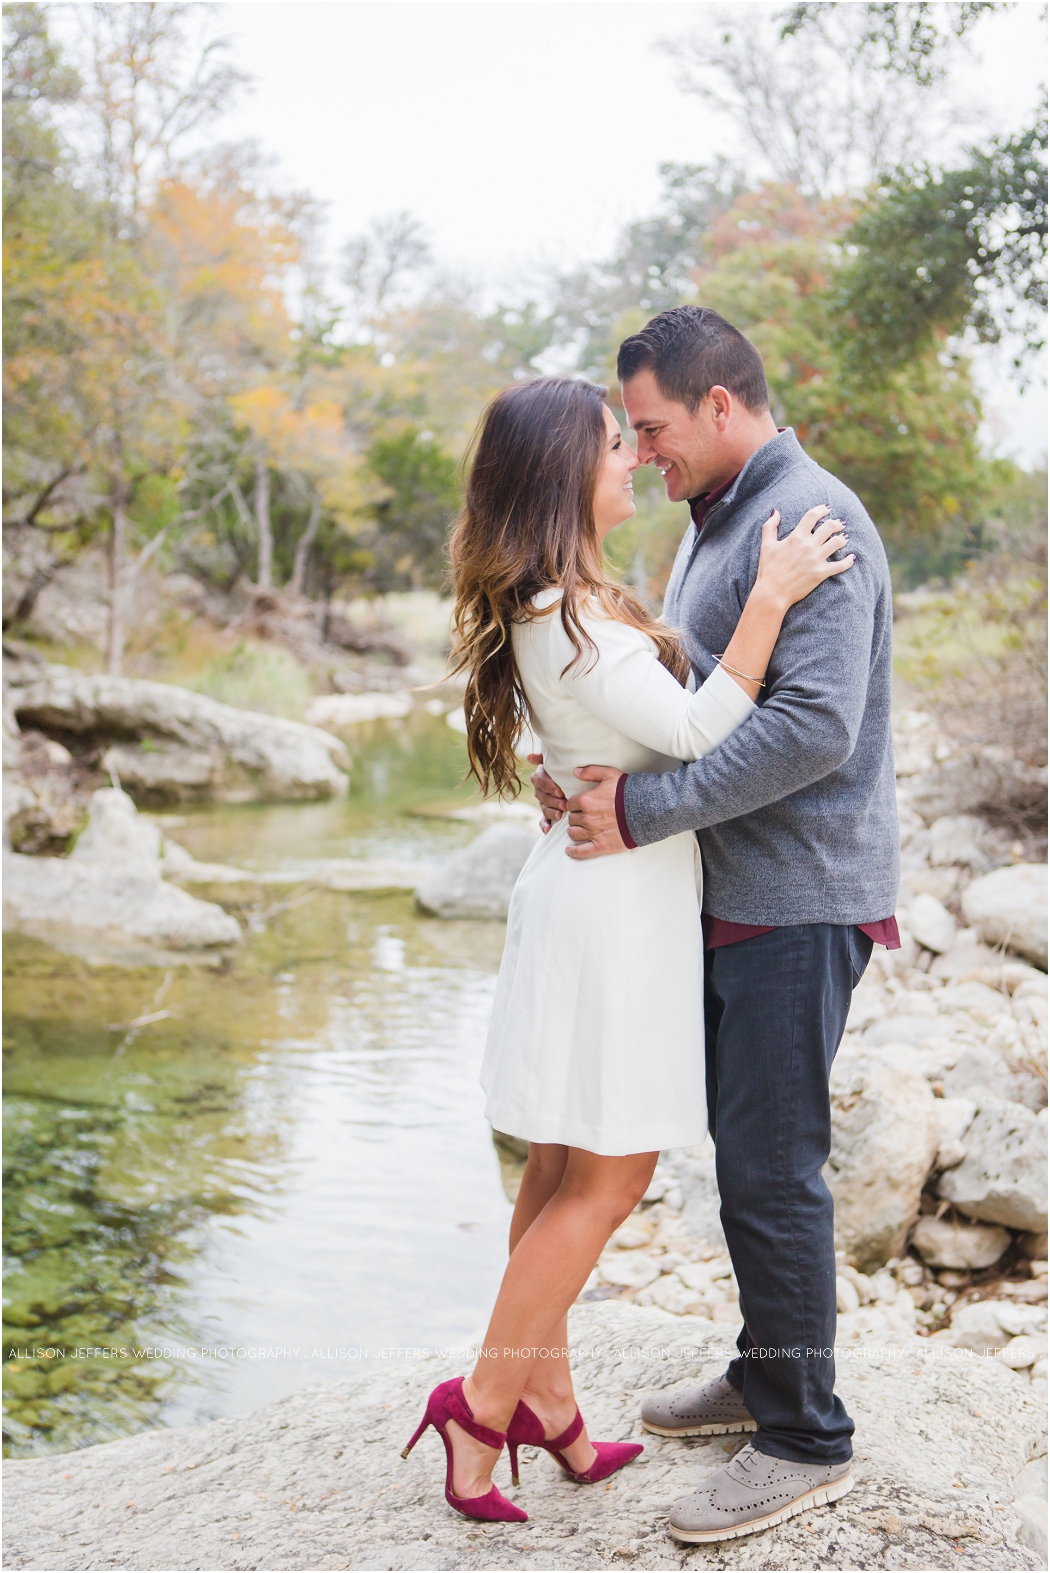 CW Hill Country Ranch Engagement Session CW Hill Country Ranch Engagement Session San Antonio Wedding Photographer Boerne Wedding Photographer Fredericksburg Wedding Photographer boerne, Texas CW Hill Country Ranch Wedding Venue Engagement session_0006